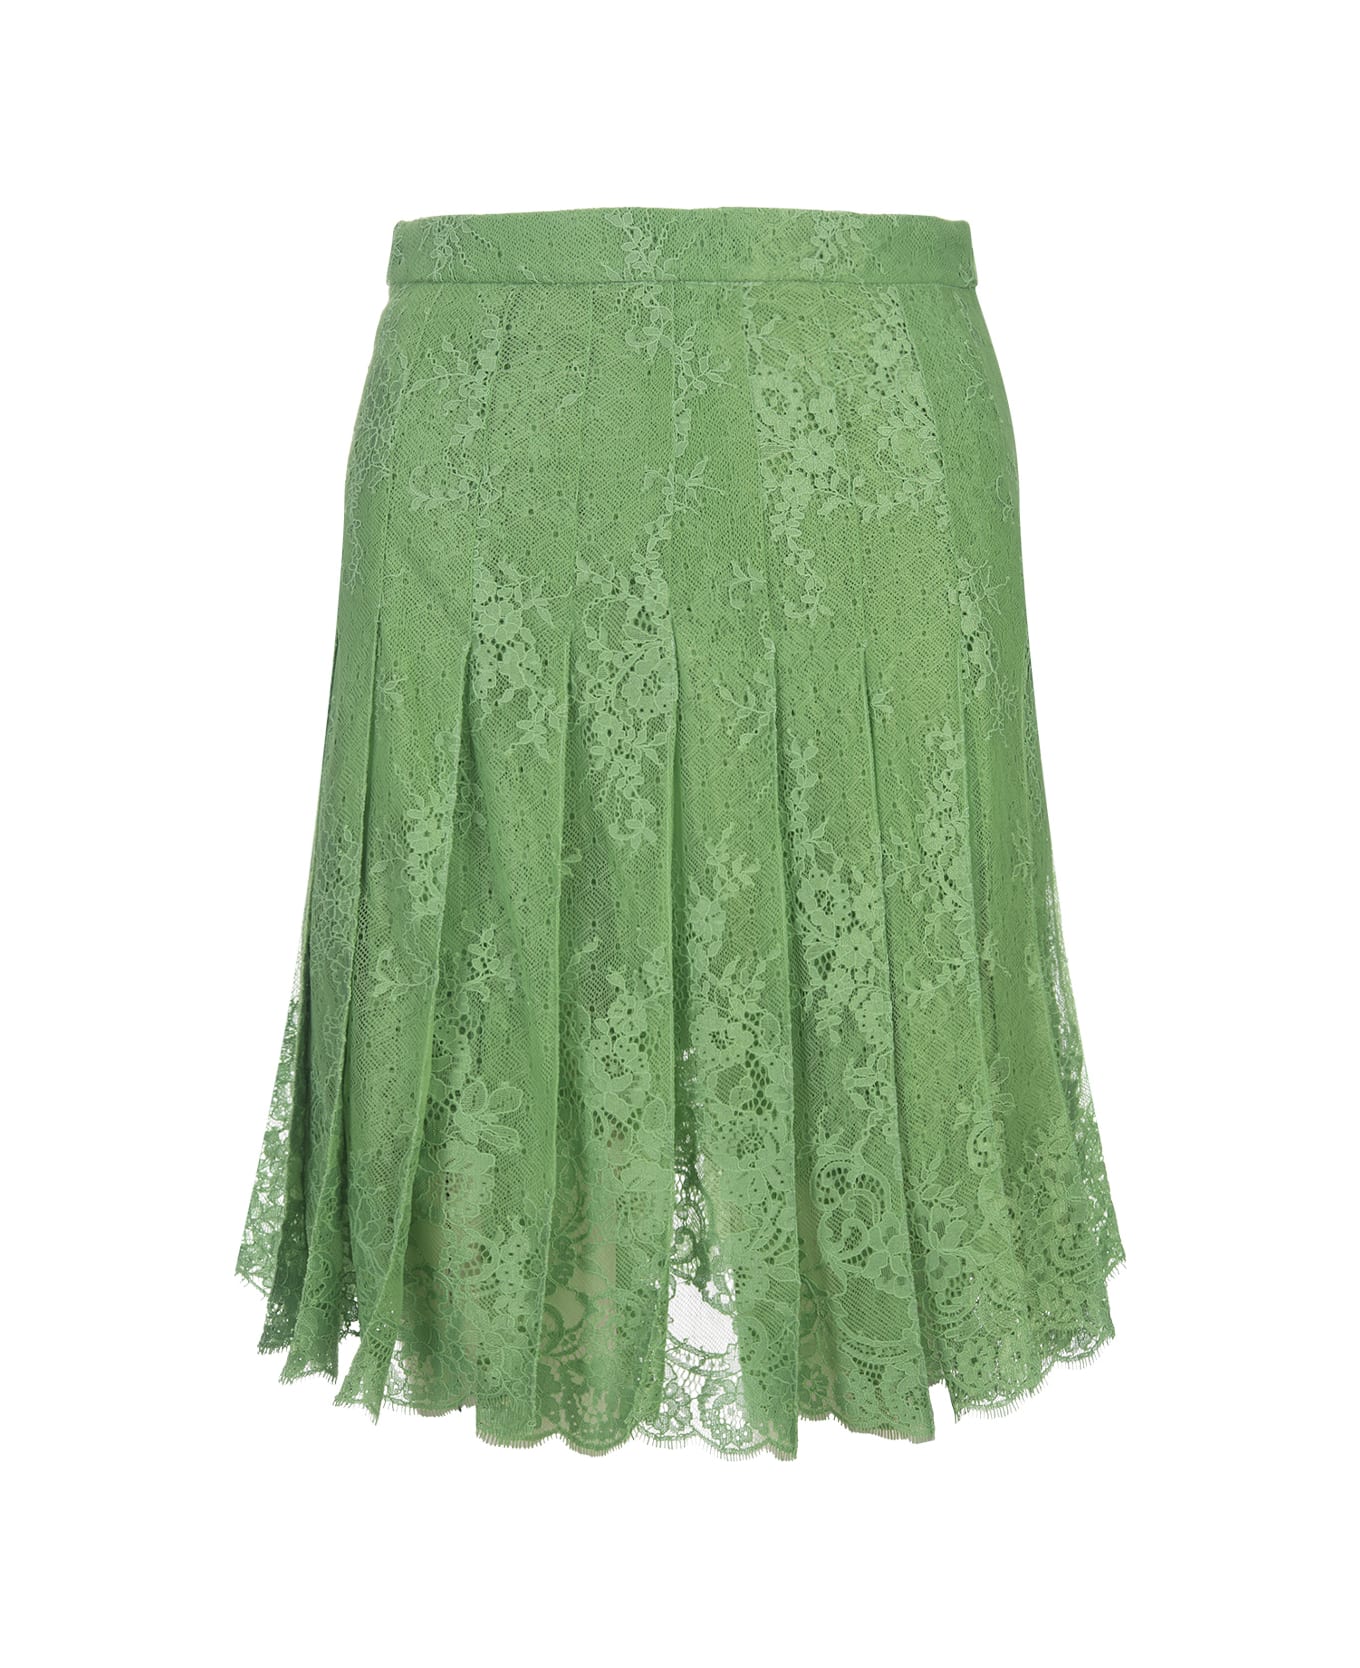 Ermanno Scervino Green Lace Pleated Skirt - Green スカート